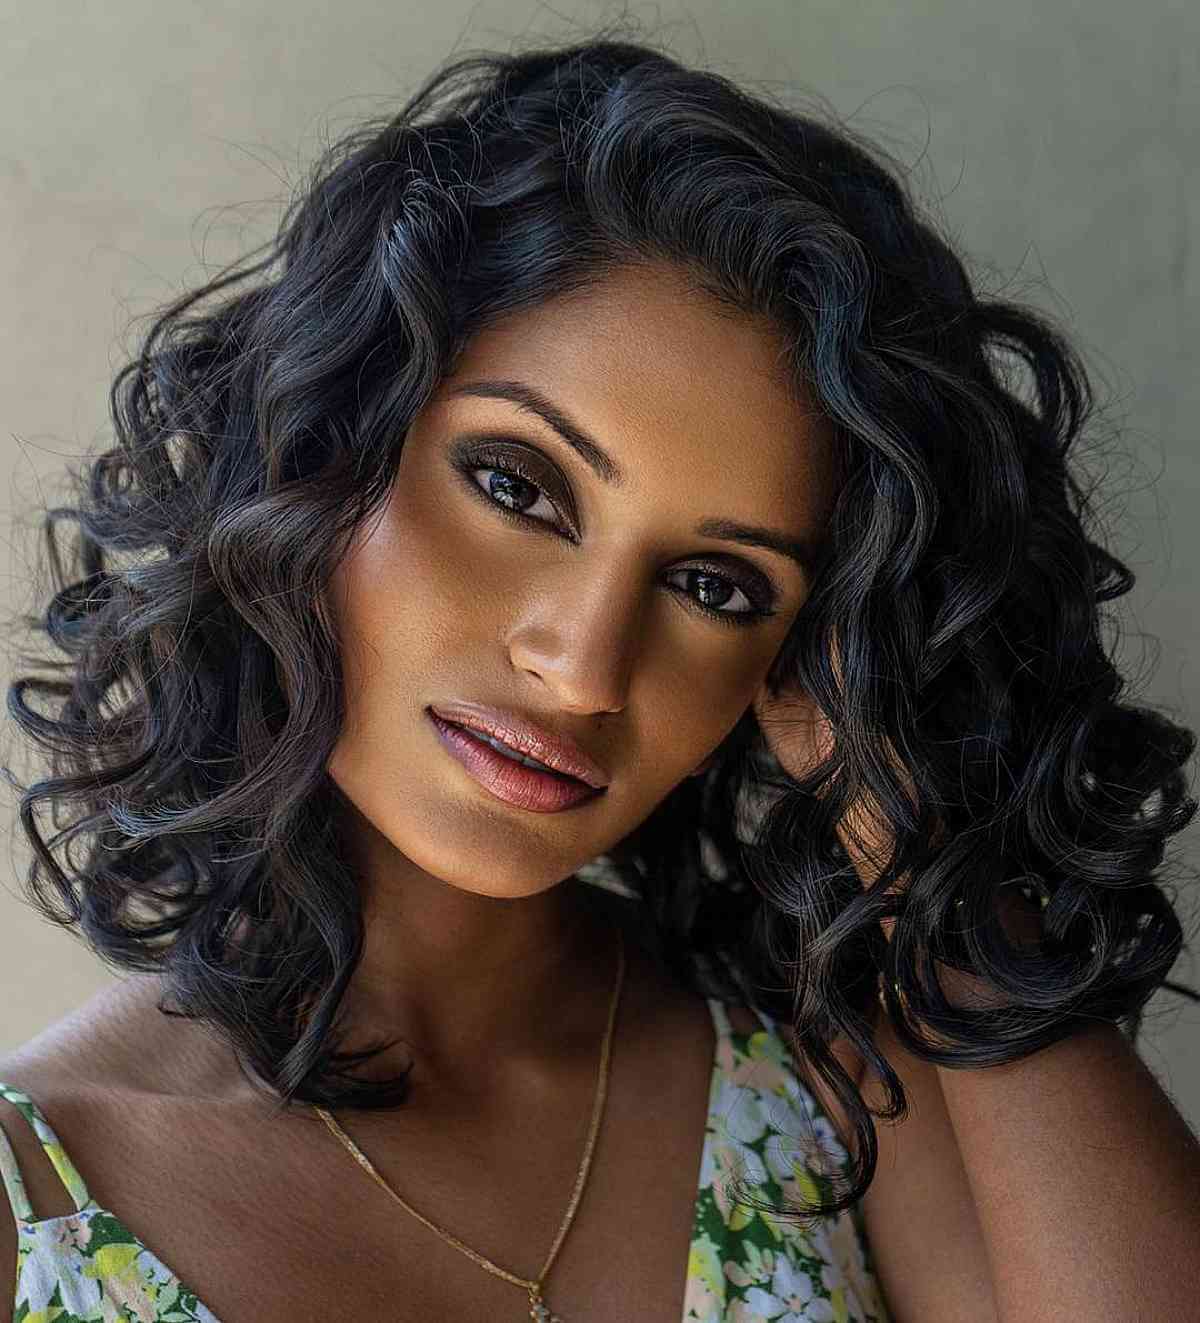 Medium-Length Curly Hair for Square Face Shapes